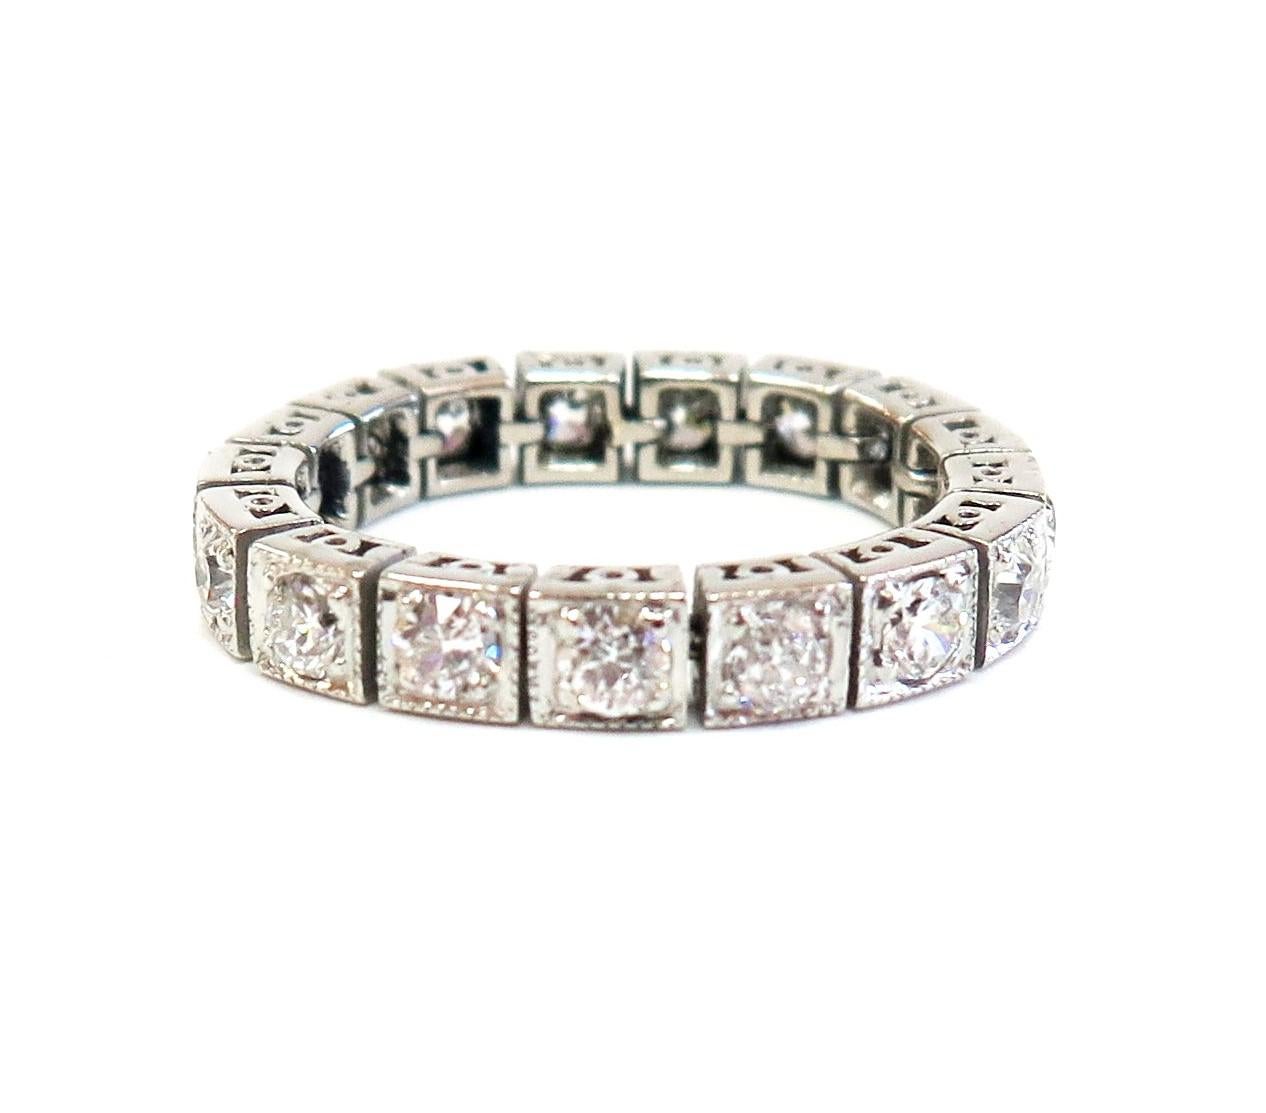 This unusual vintage eternity wedding band for women is flexible.  It has sparkling, bright Old European Cut diamonds. It's soo comfortable!

There are 17 Old European Cut diamonds at 0.06 Carat each, in total 1.02 Carats, Color: H-I, Clarity: